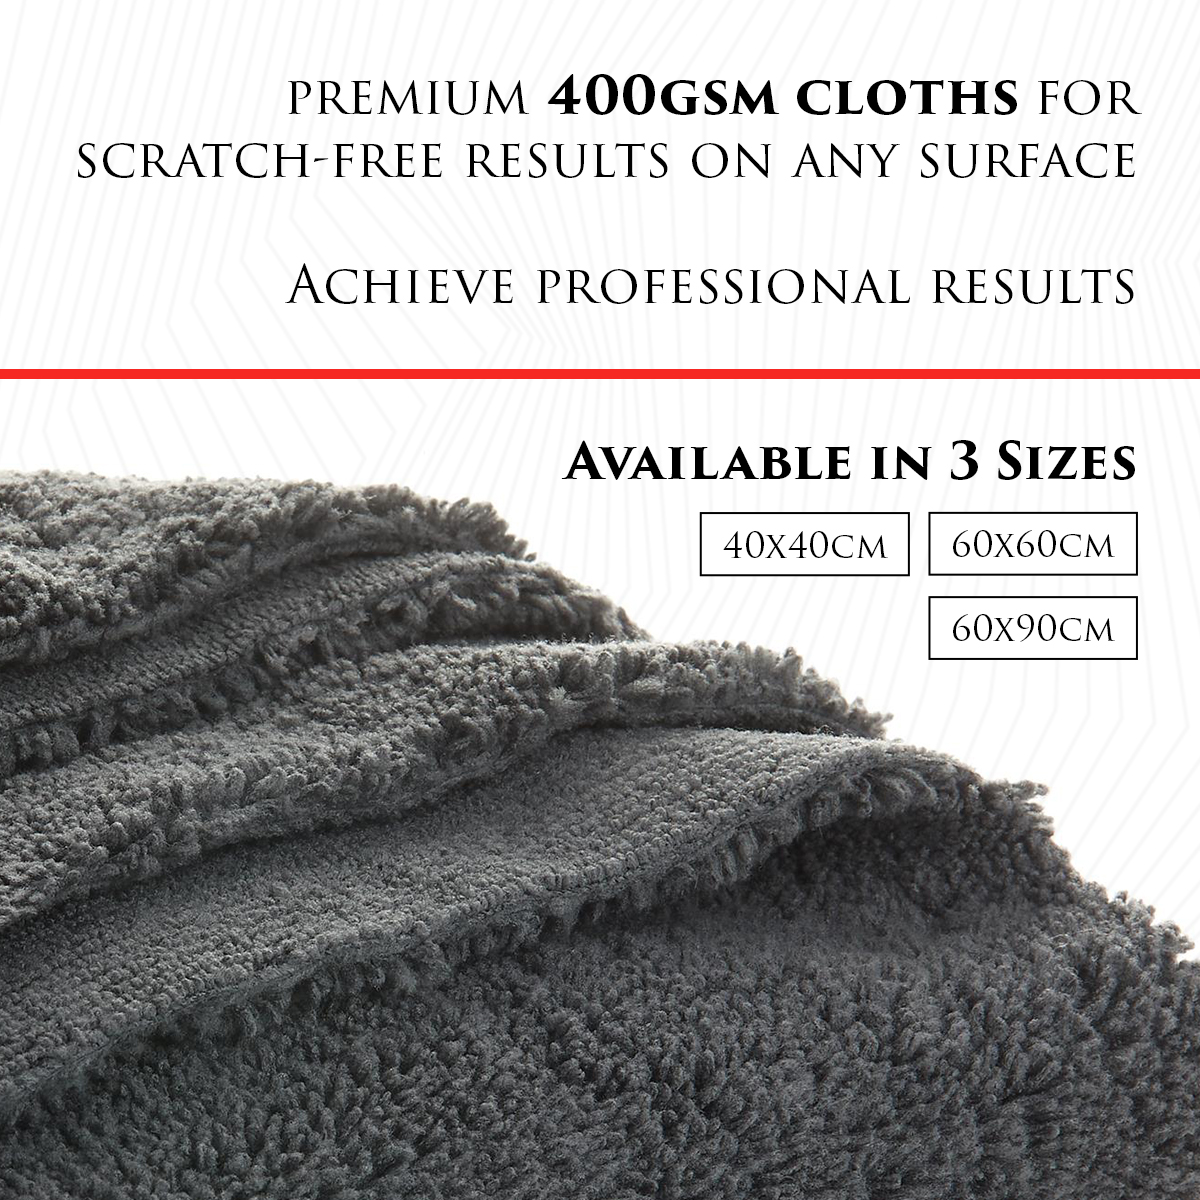 Achieve professional results with the premium 400gsm cloths for scratch-free results on any surface. Car Gods Microfibre Cloths are available in 3 sizes: 40x40cm, 60x60cm, 60x90cm.